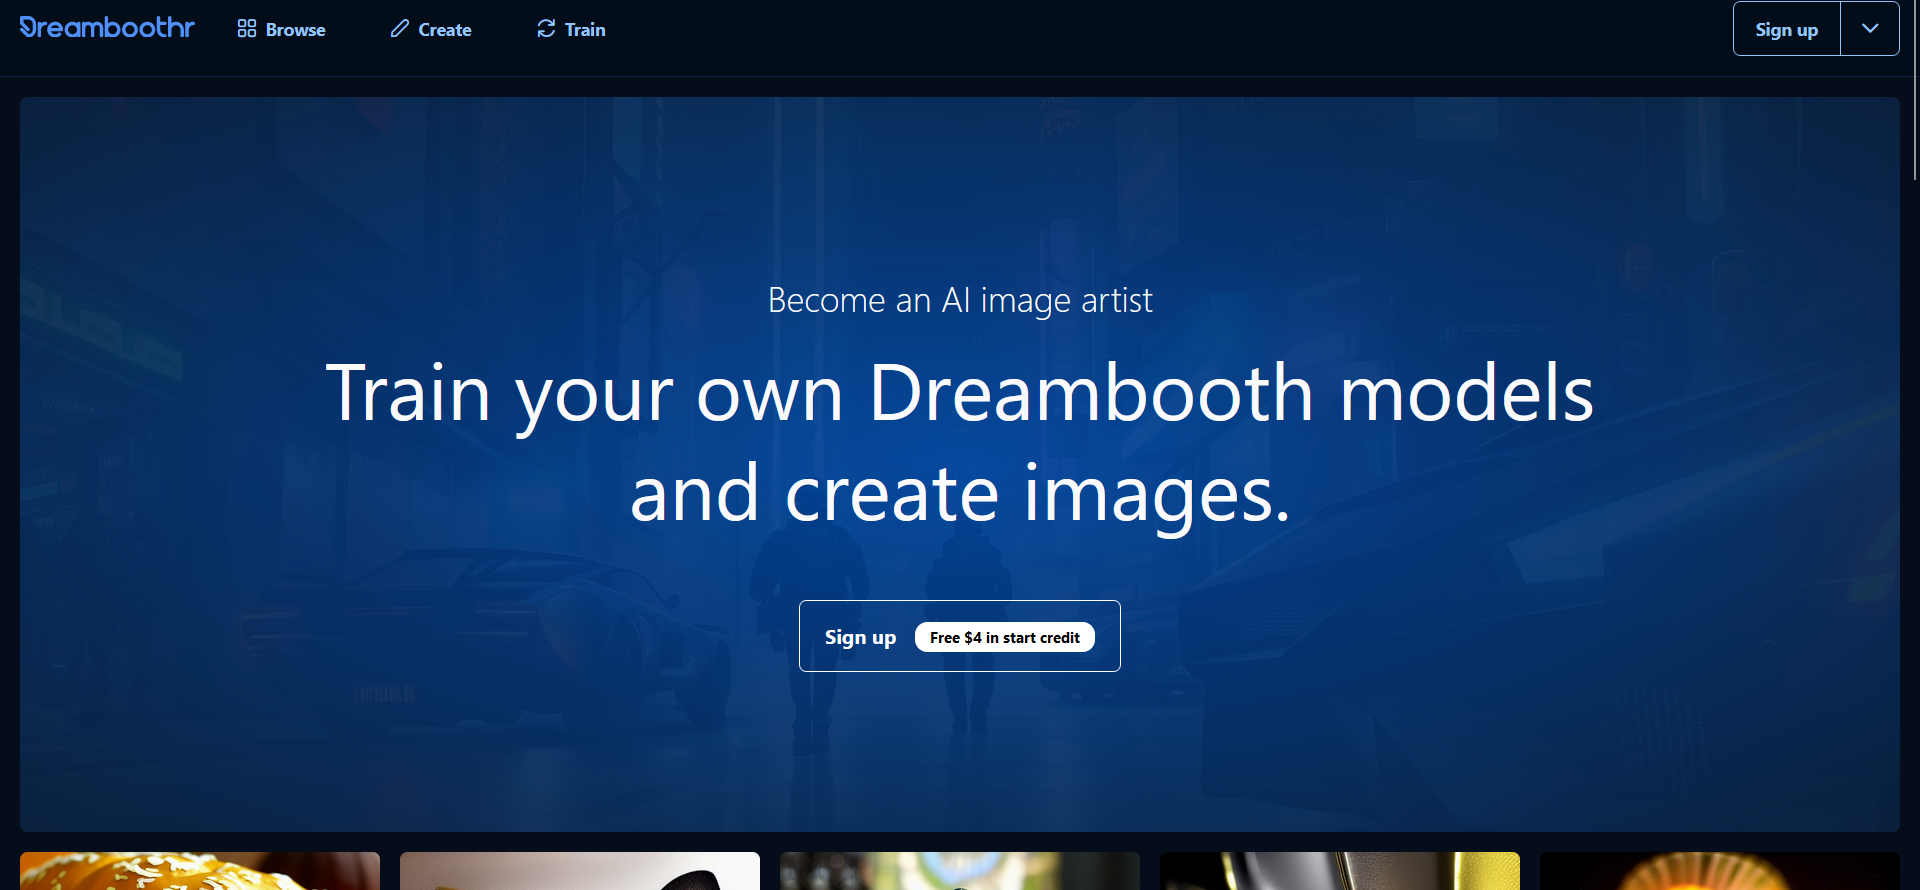 DreamboothCreate and generate personalized images using Dreambooth models with self training